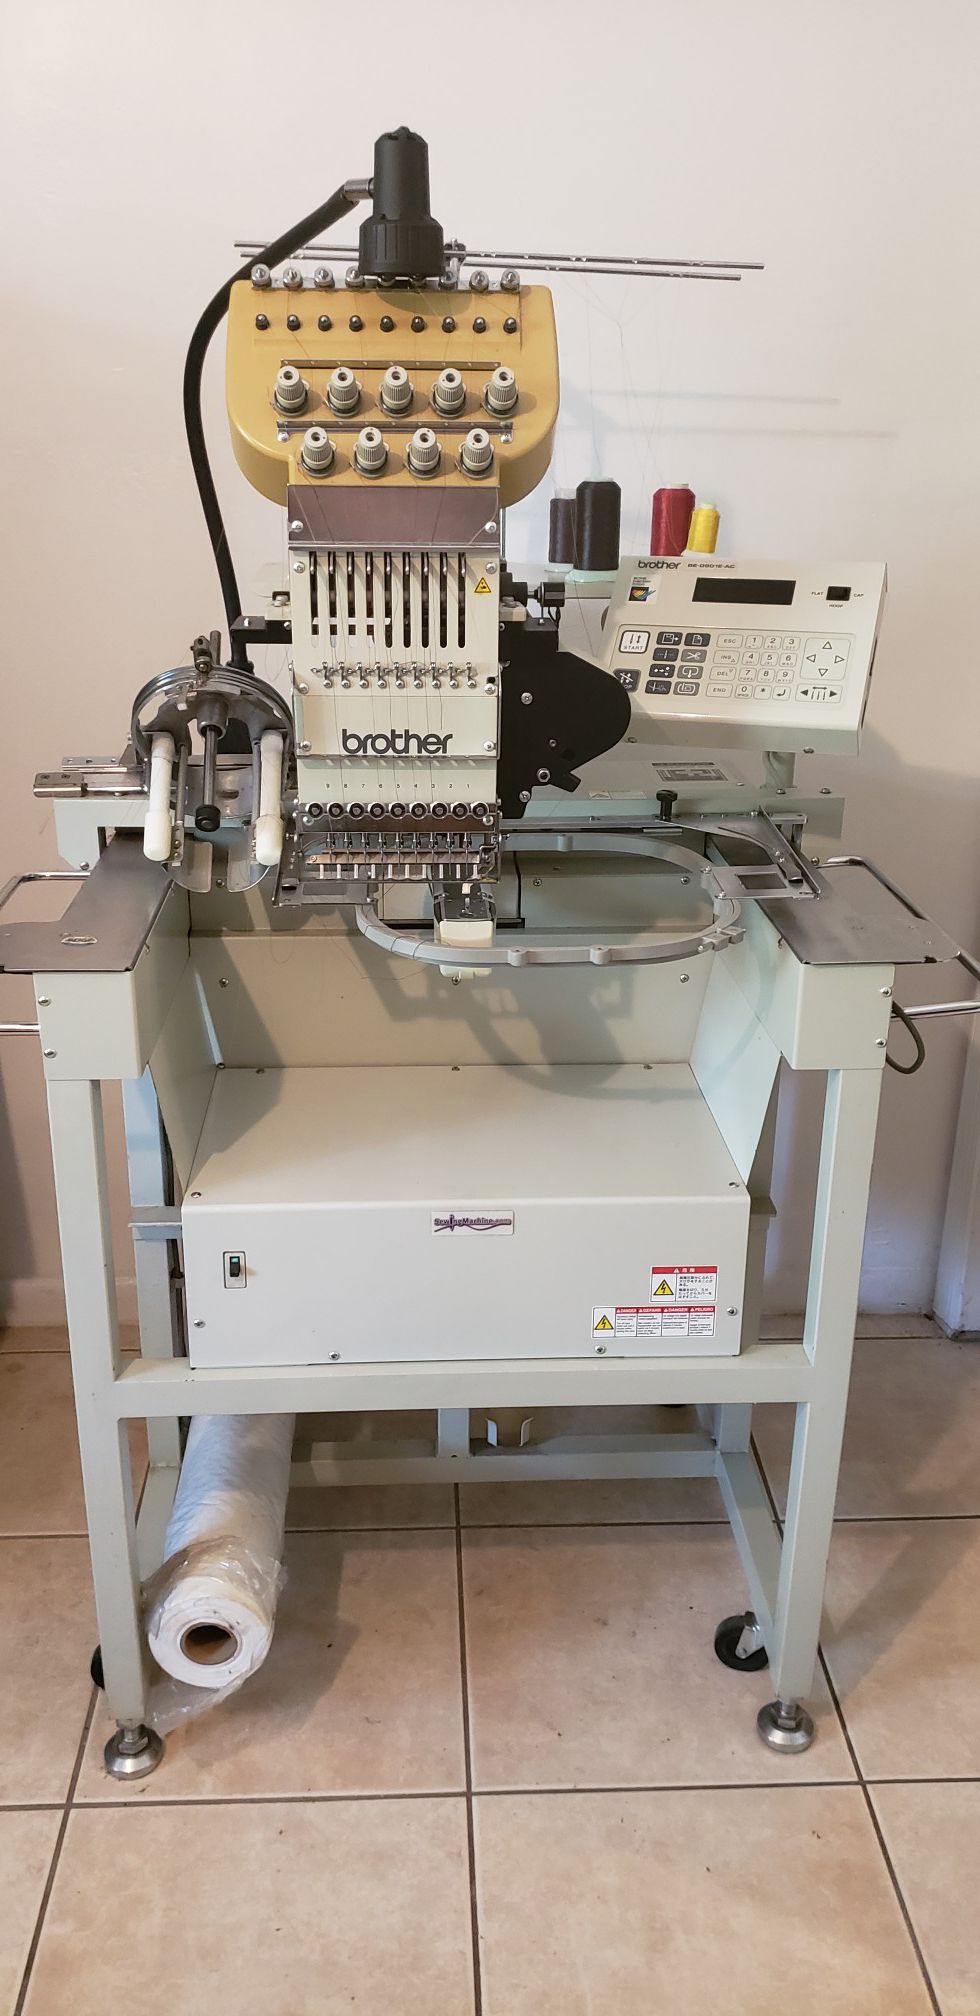 Brother Sewing And Embroidery Machine for Sale in Orlando, FL - OfferUp